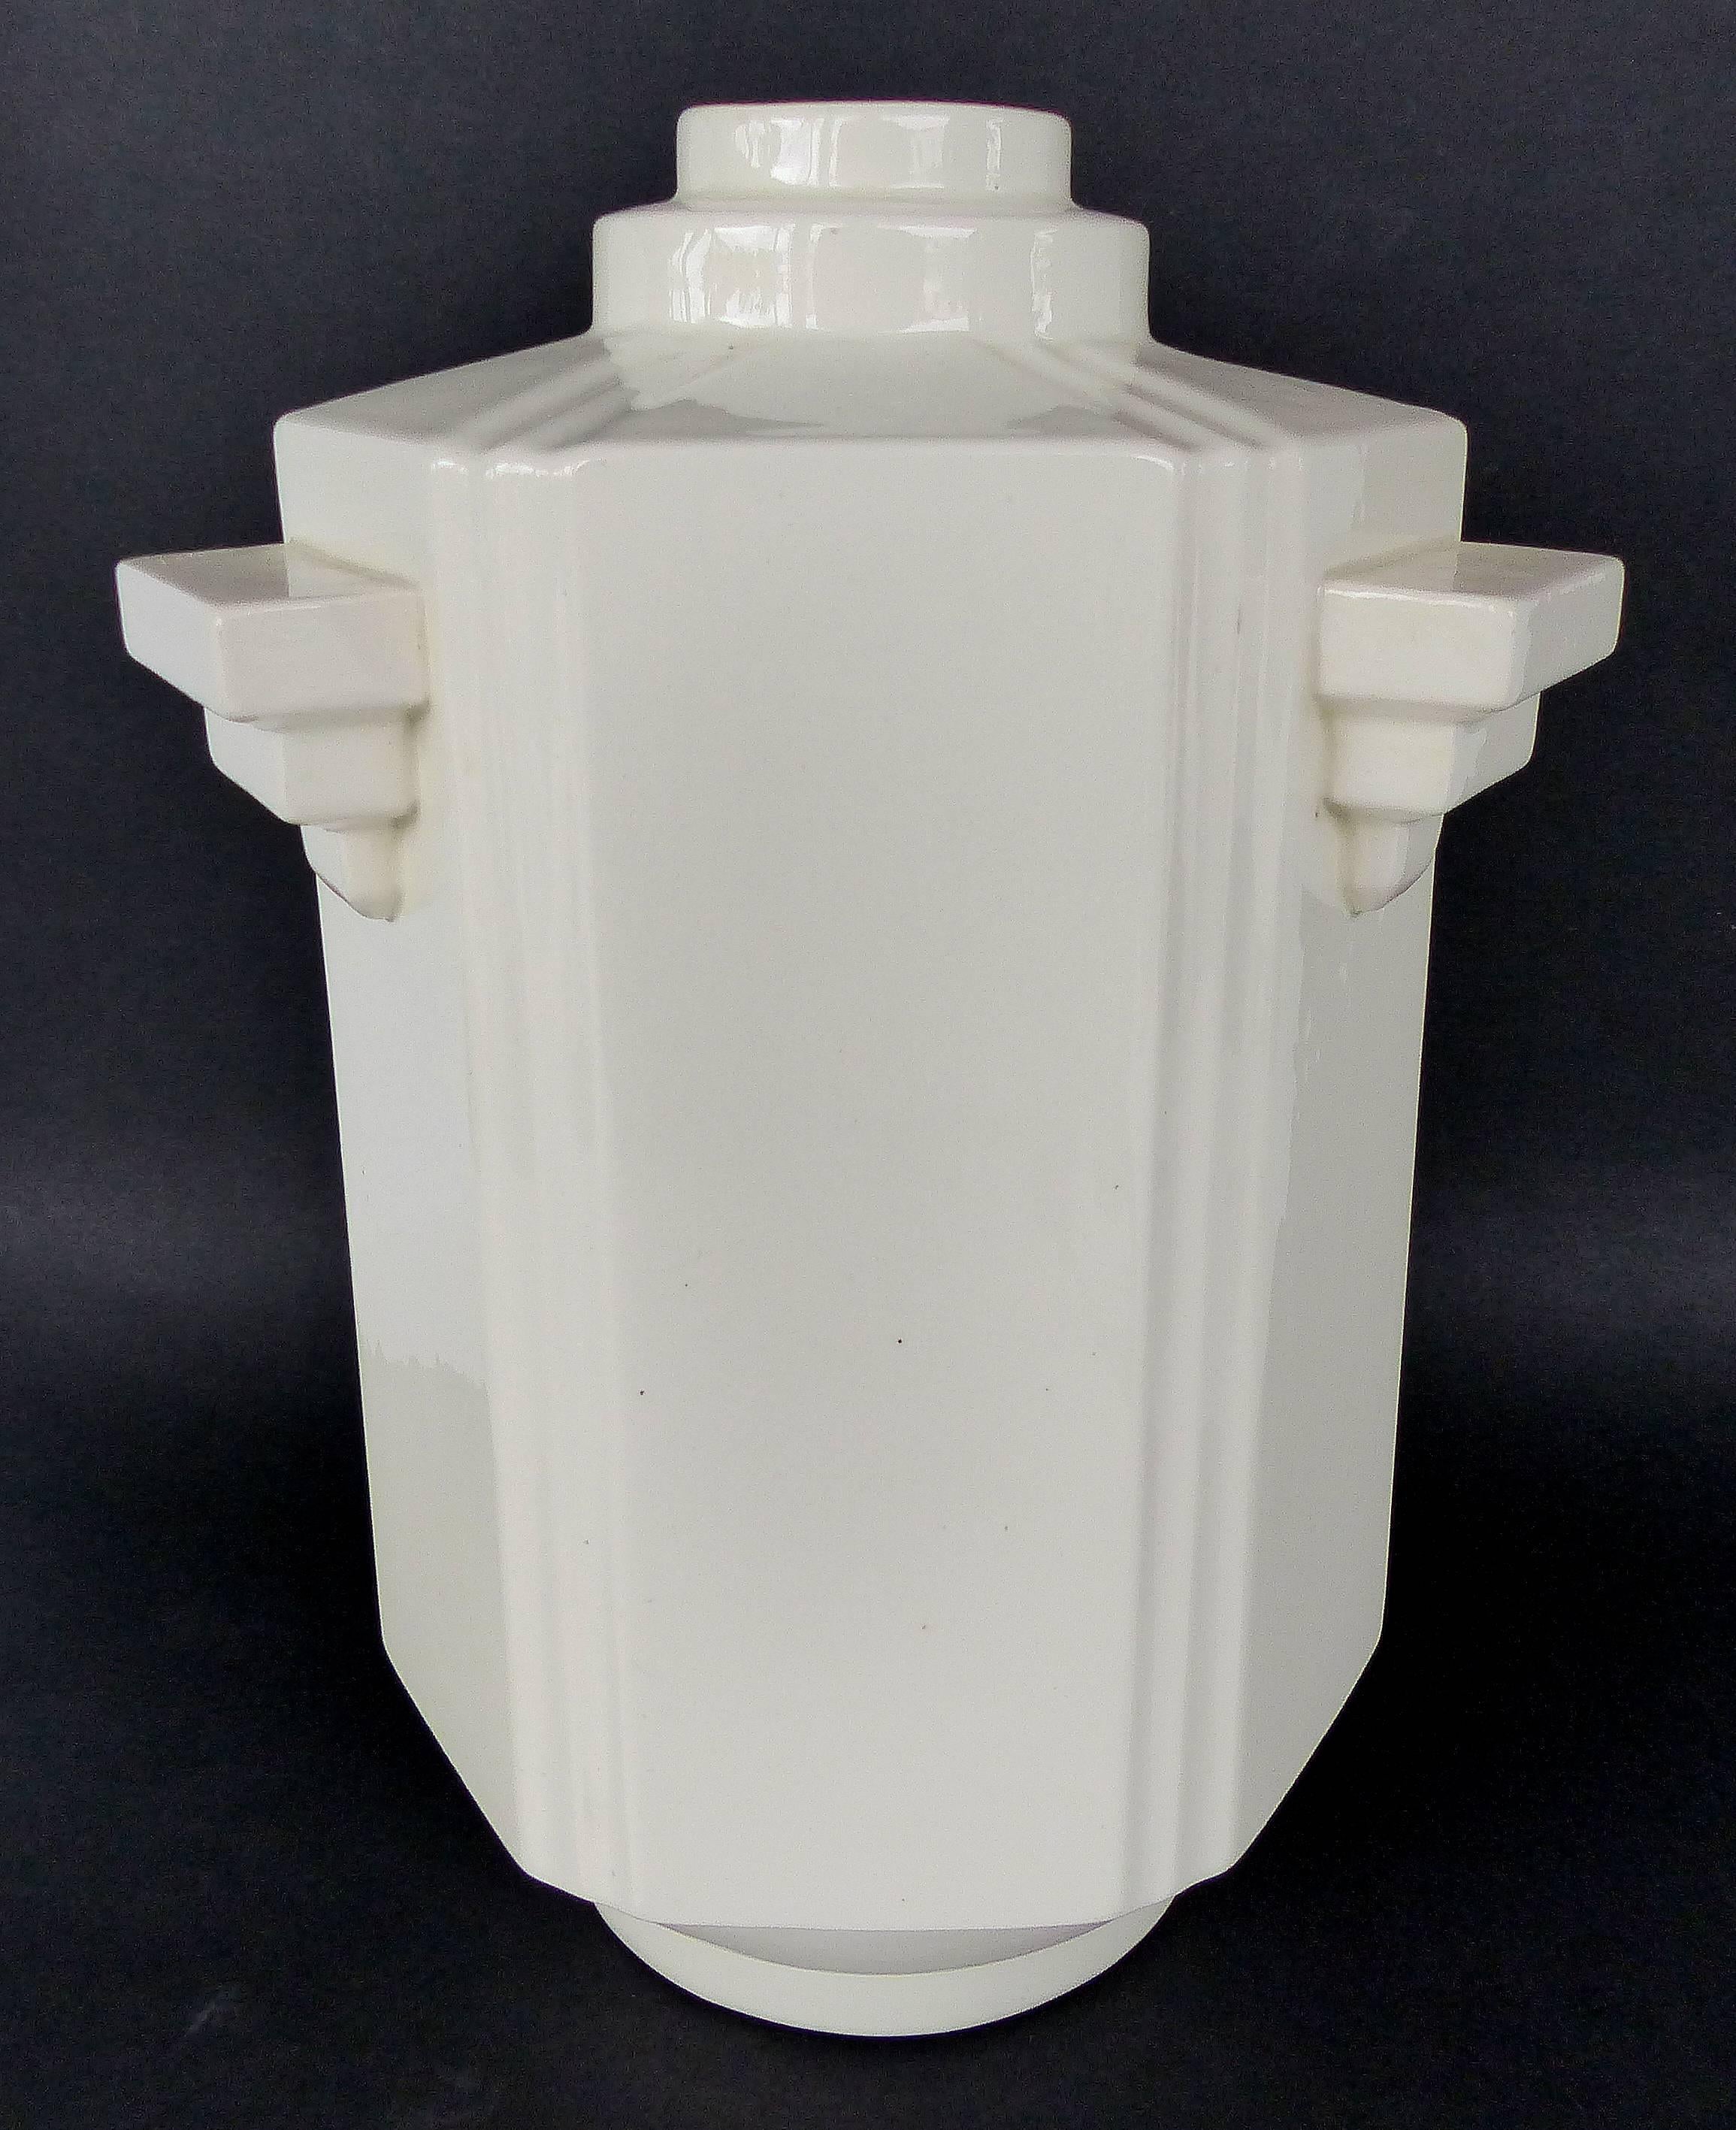 Art Deco Vase from Boch Frères La Louvière, Belgium, circa 1920s

Offered for sale is a Belgian Art Deco vase from Boch Frères La Louvière, circa 1920s with stepped handles and a skyscraper form. Marked on underside with the ink mark used in the